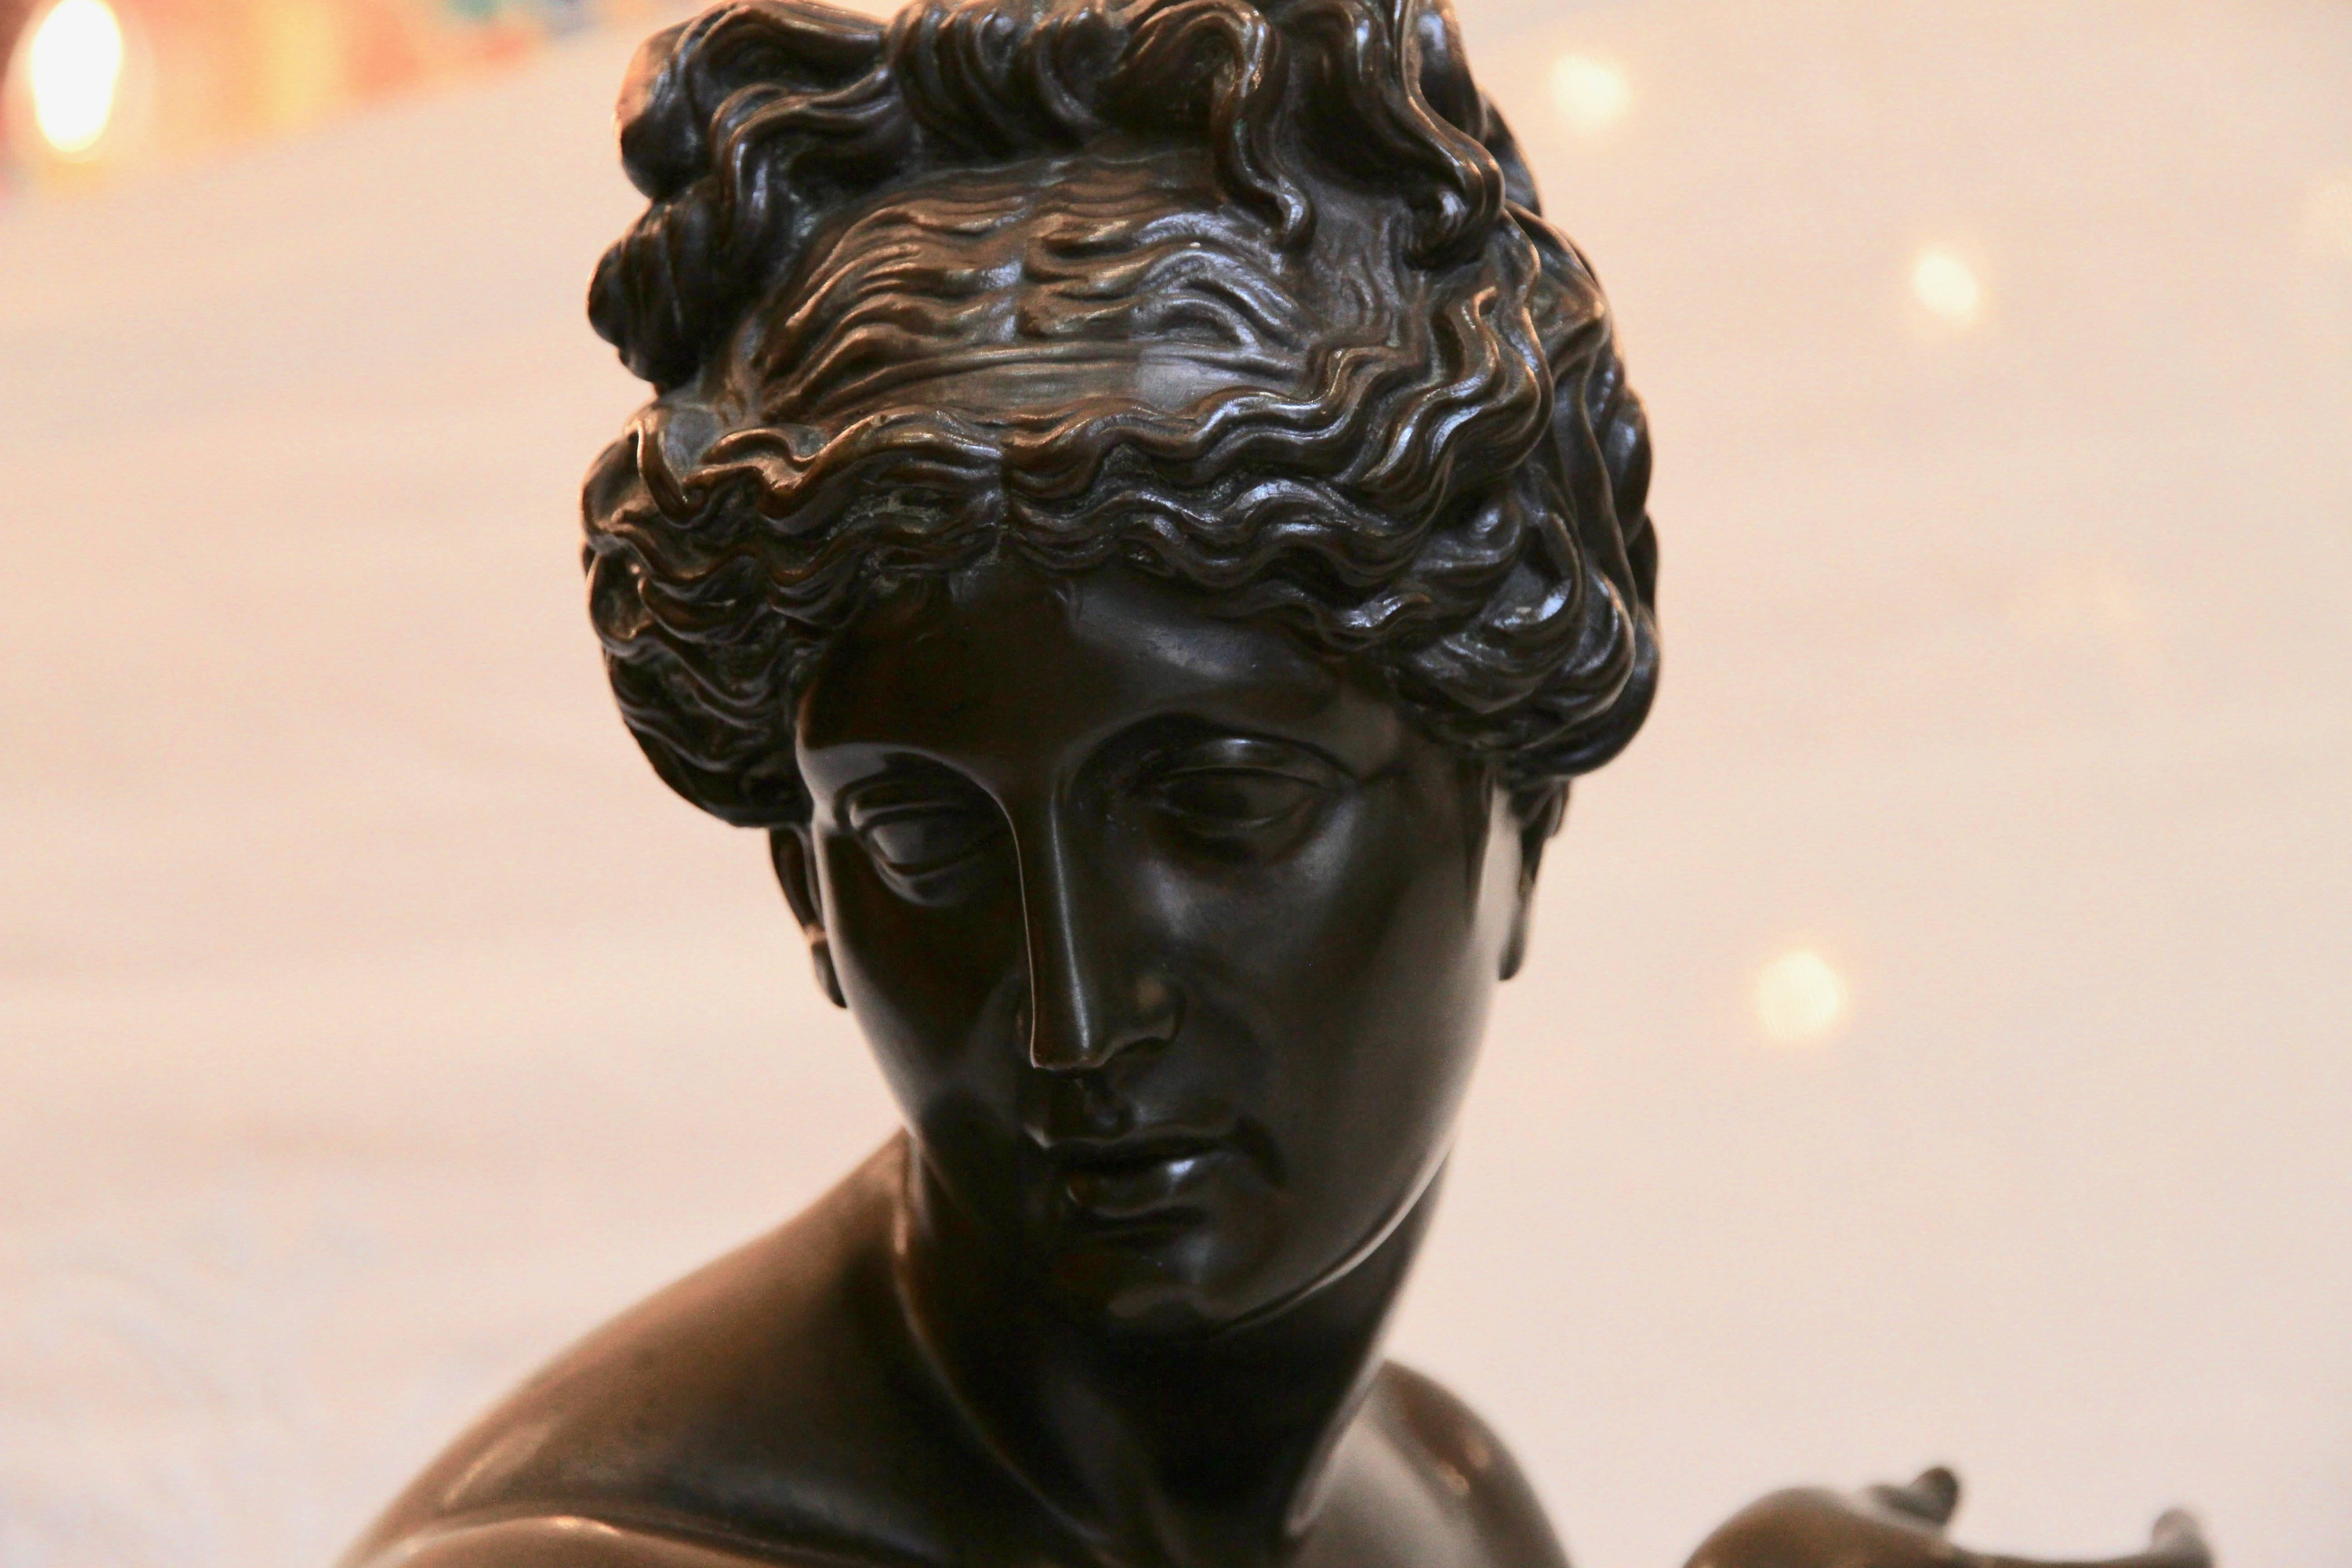 This very delicate Venus was reduced by a mechanical process elaborated by Achille Colas in the 19th century.

The original model was created by Antoine Coysevox (1640 – 1720) while the art caster of our bronze sculpture here was Ferdinand